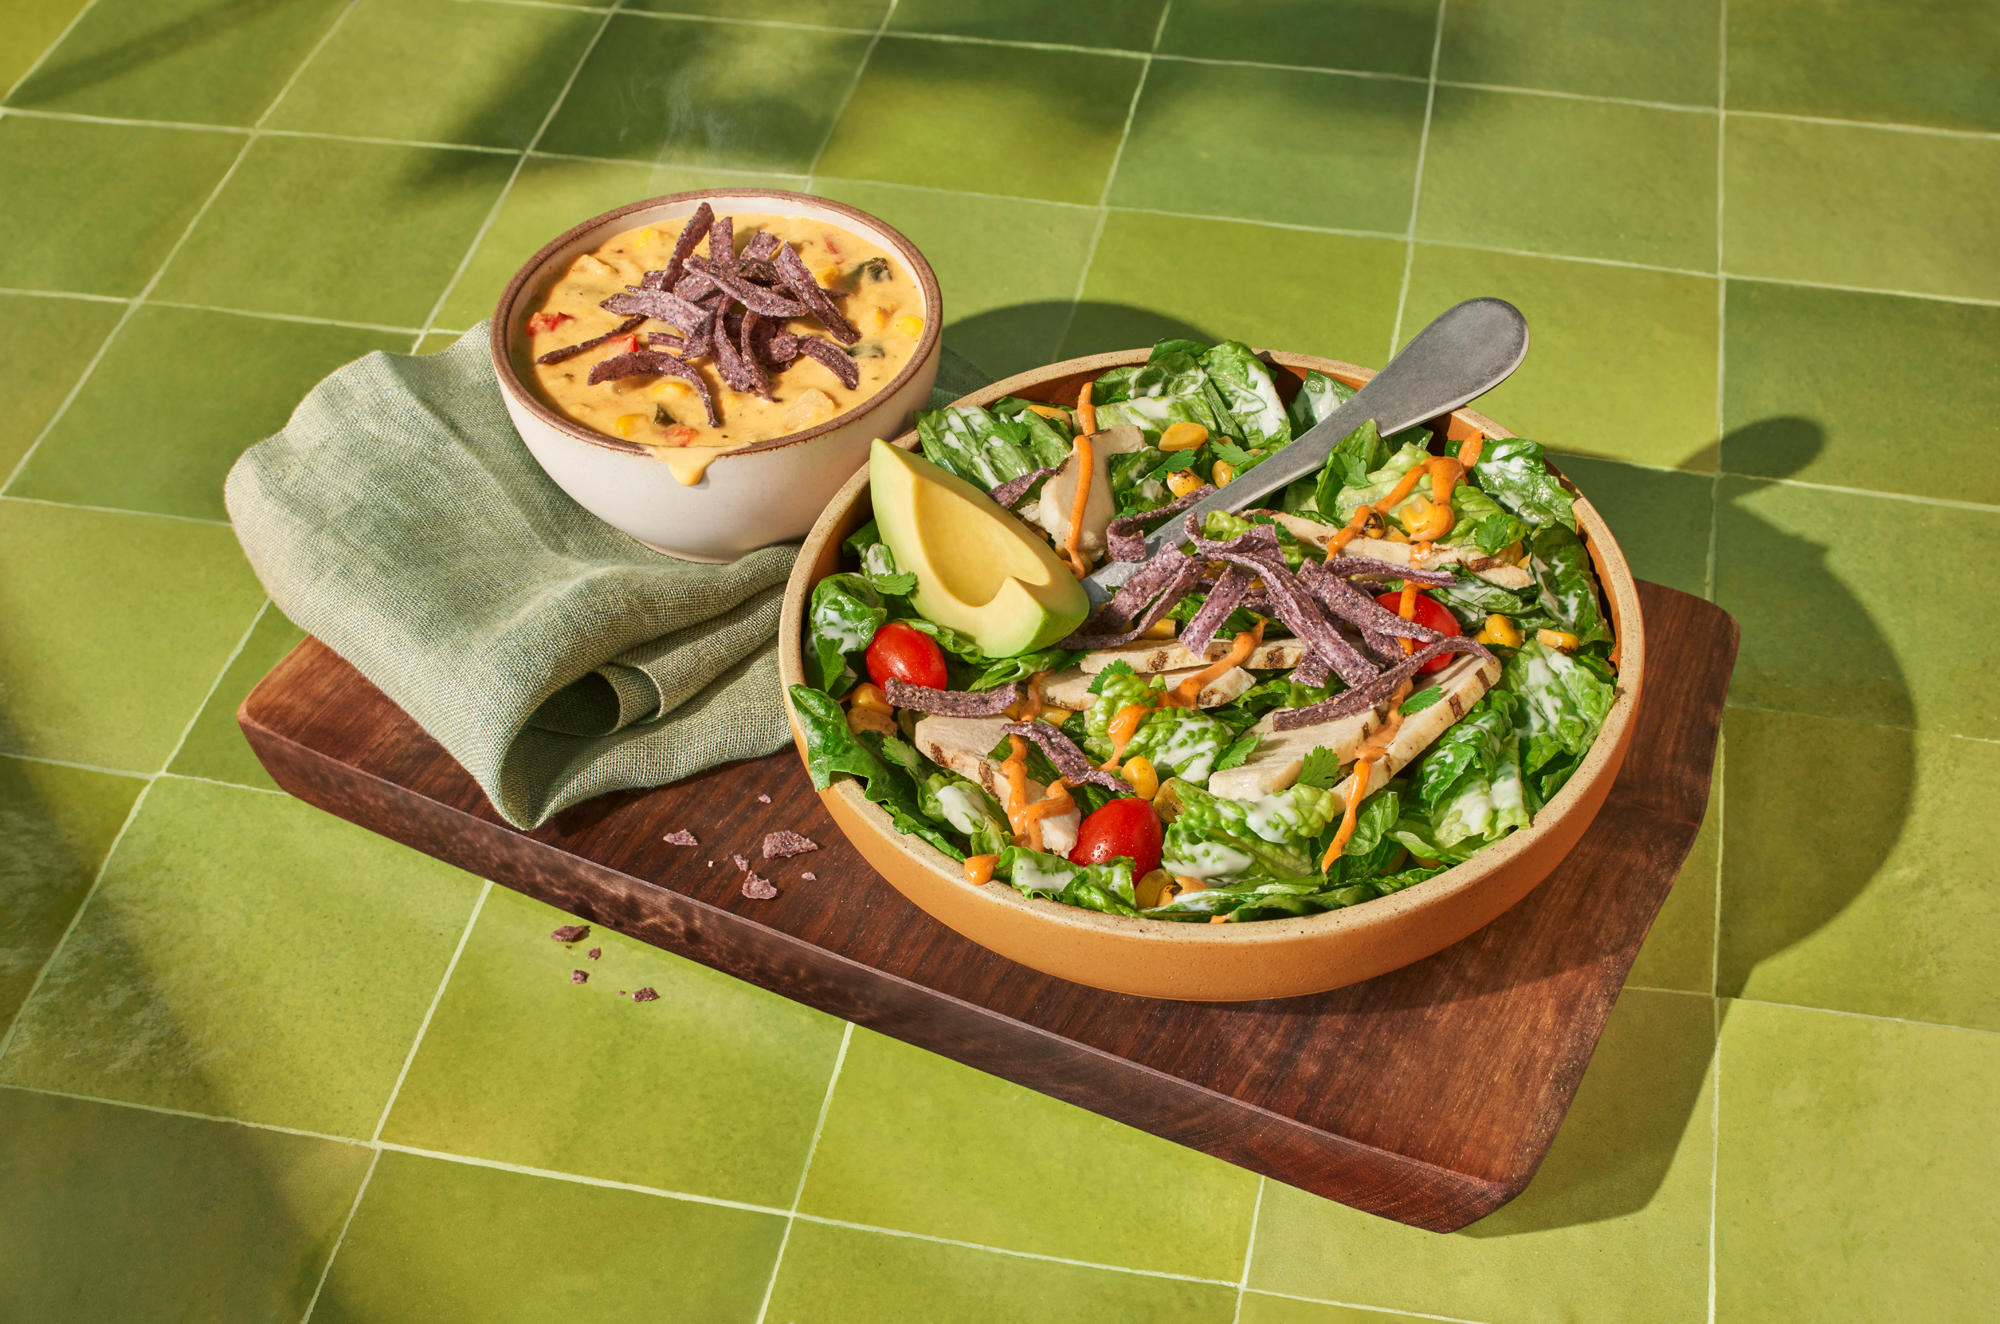 Southwest Chicken Ranch Salad & Mexican Street Corn Chowder Cup You Pick 2 Panera Bread Miami (305)969-7018